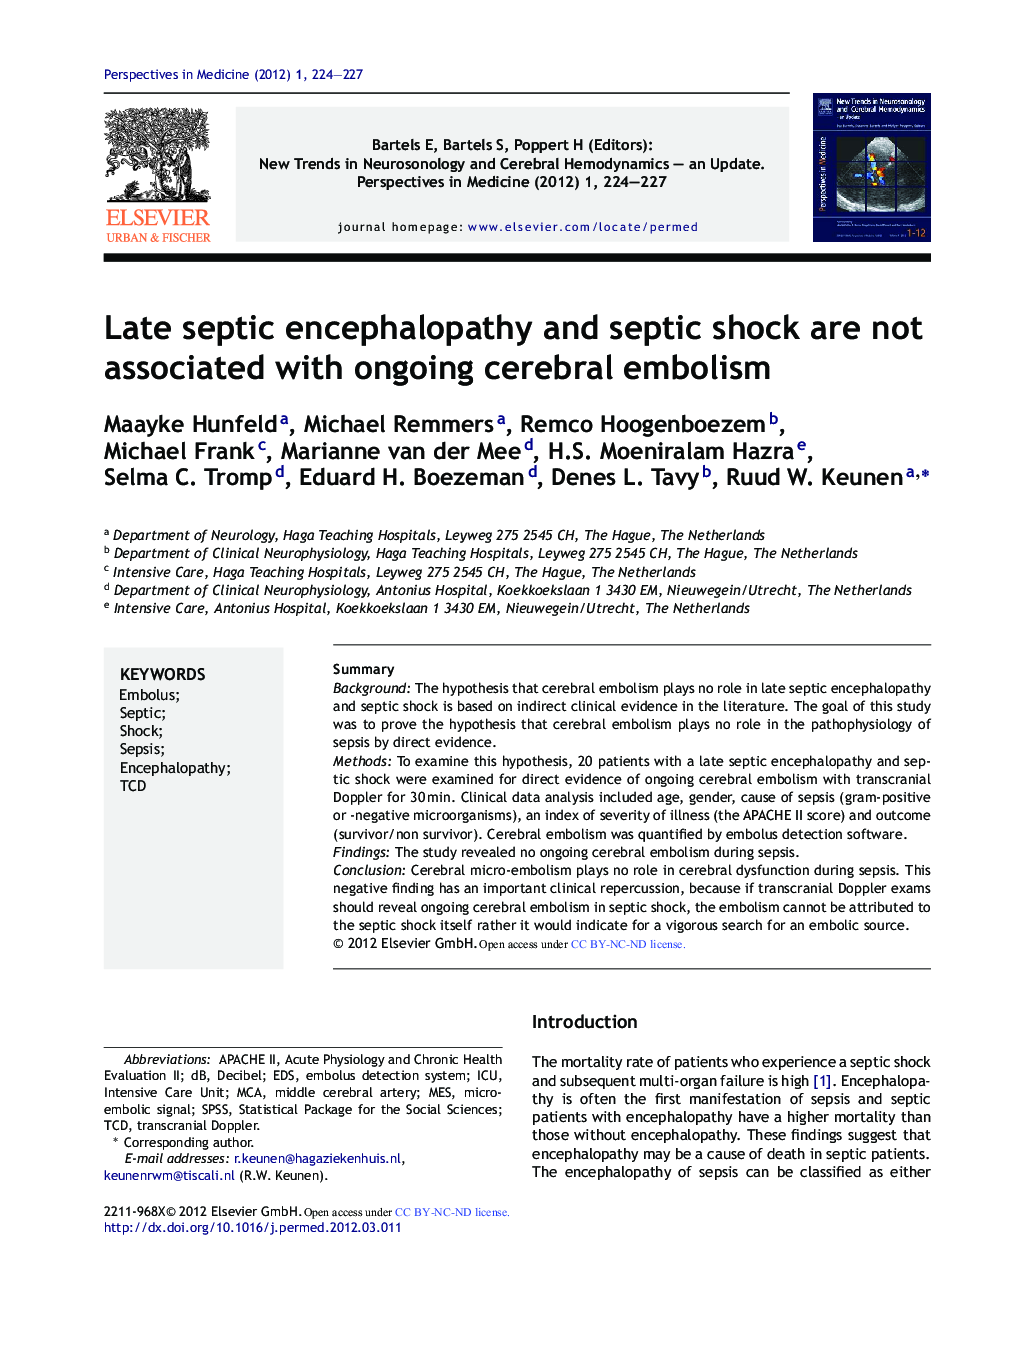 Late septic encephalopathy and septic shock are not associated with ongoing cerebral embolism